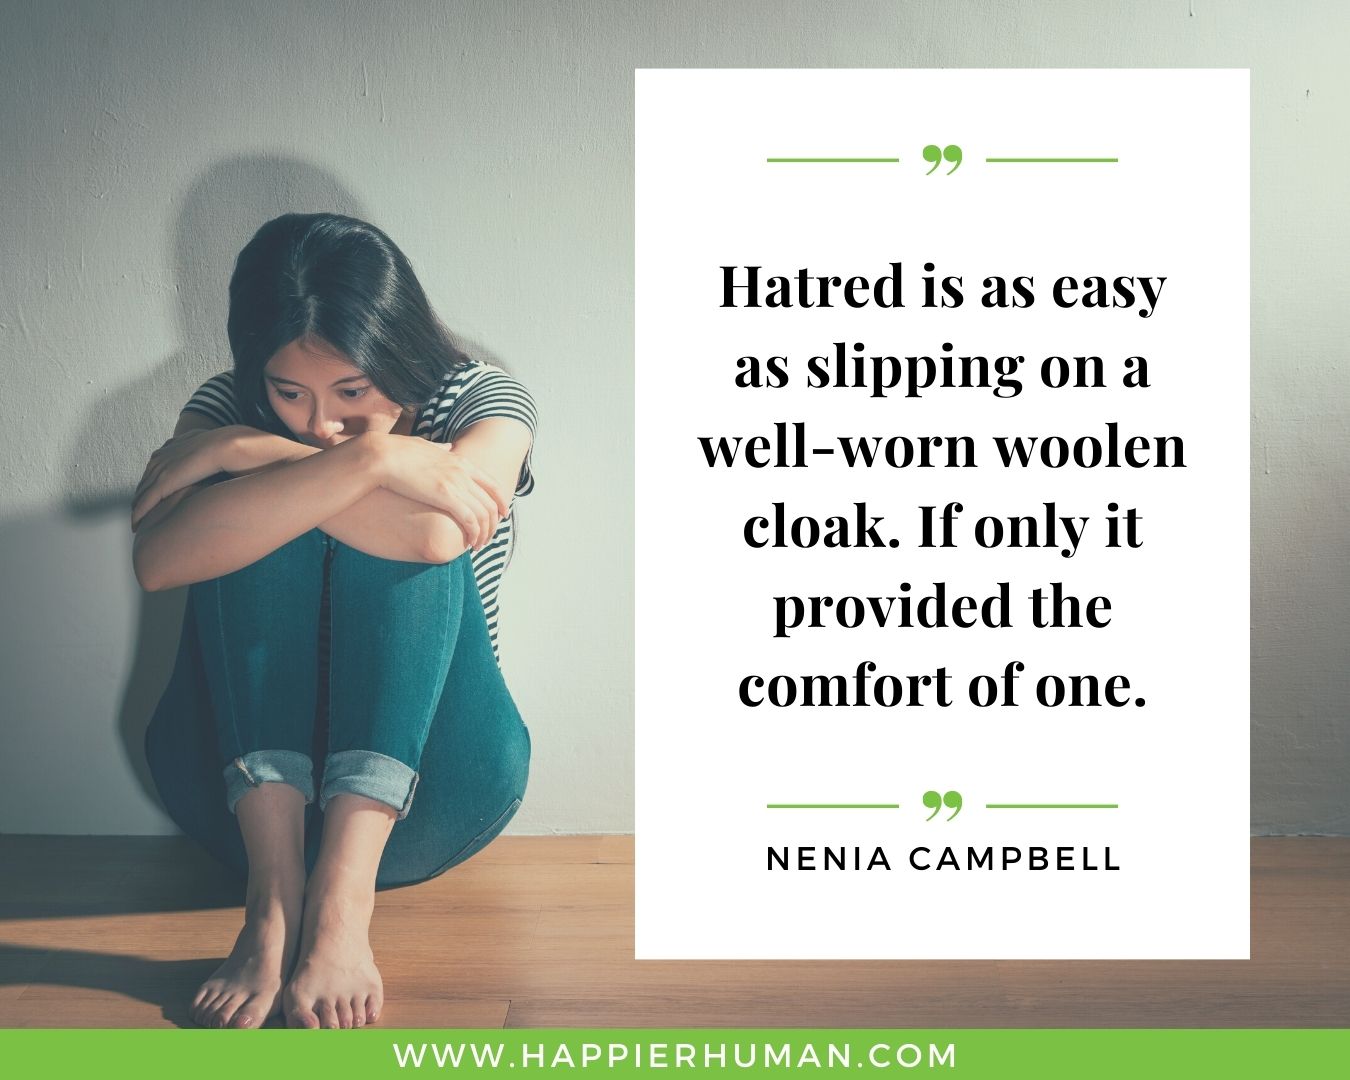 Haters Quotes - “Hatred is as easy as slipping on a well-worn woolen cloak. If only it provided the comfort of one.” - Nenia Campbell